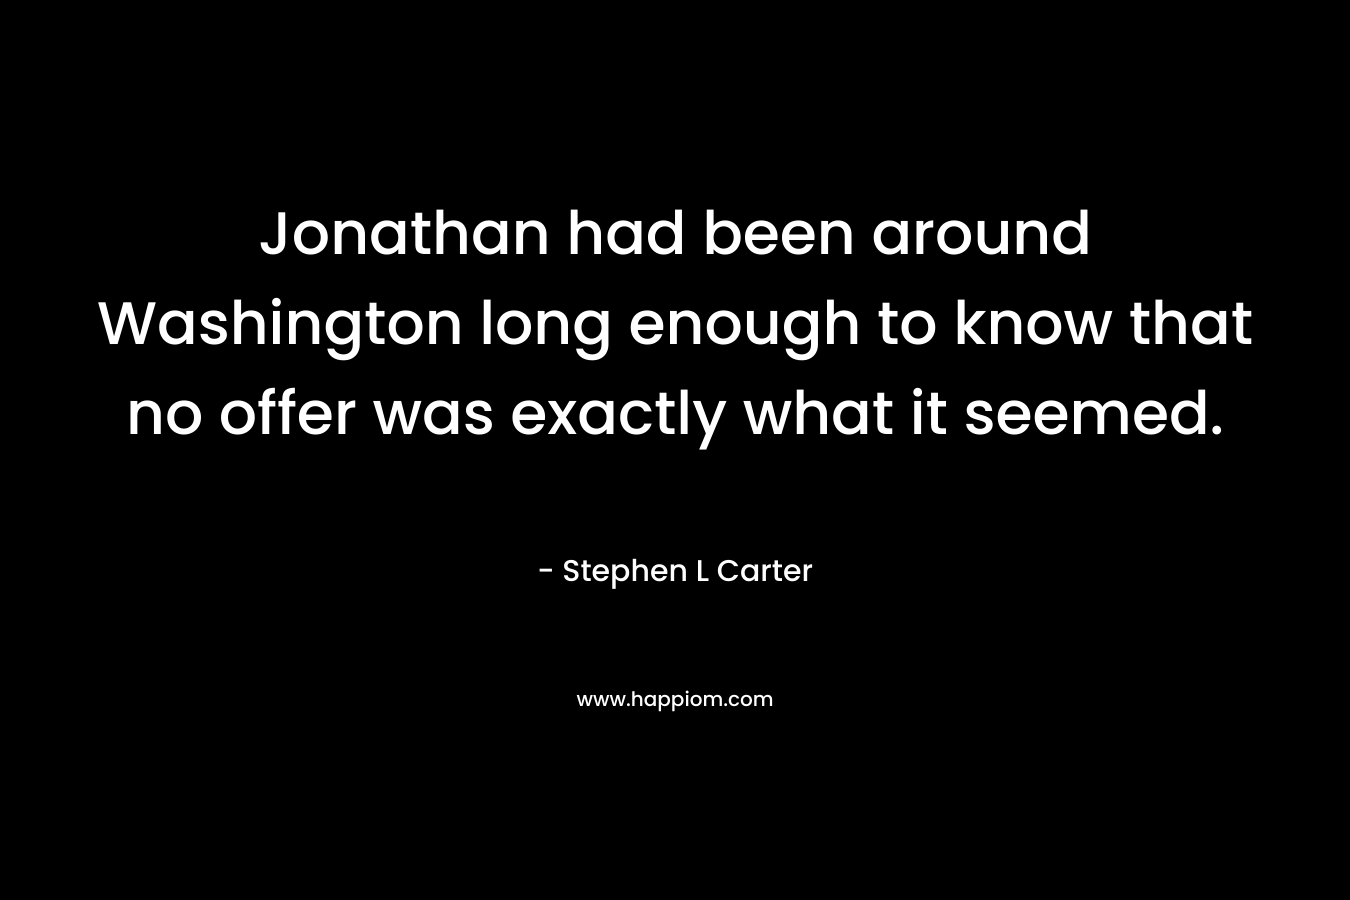 Jonathan had been around Washington long enough to know that no offer was exactly what it seemed. – Stephen L Carter